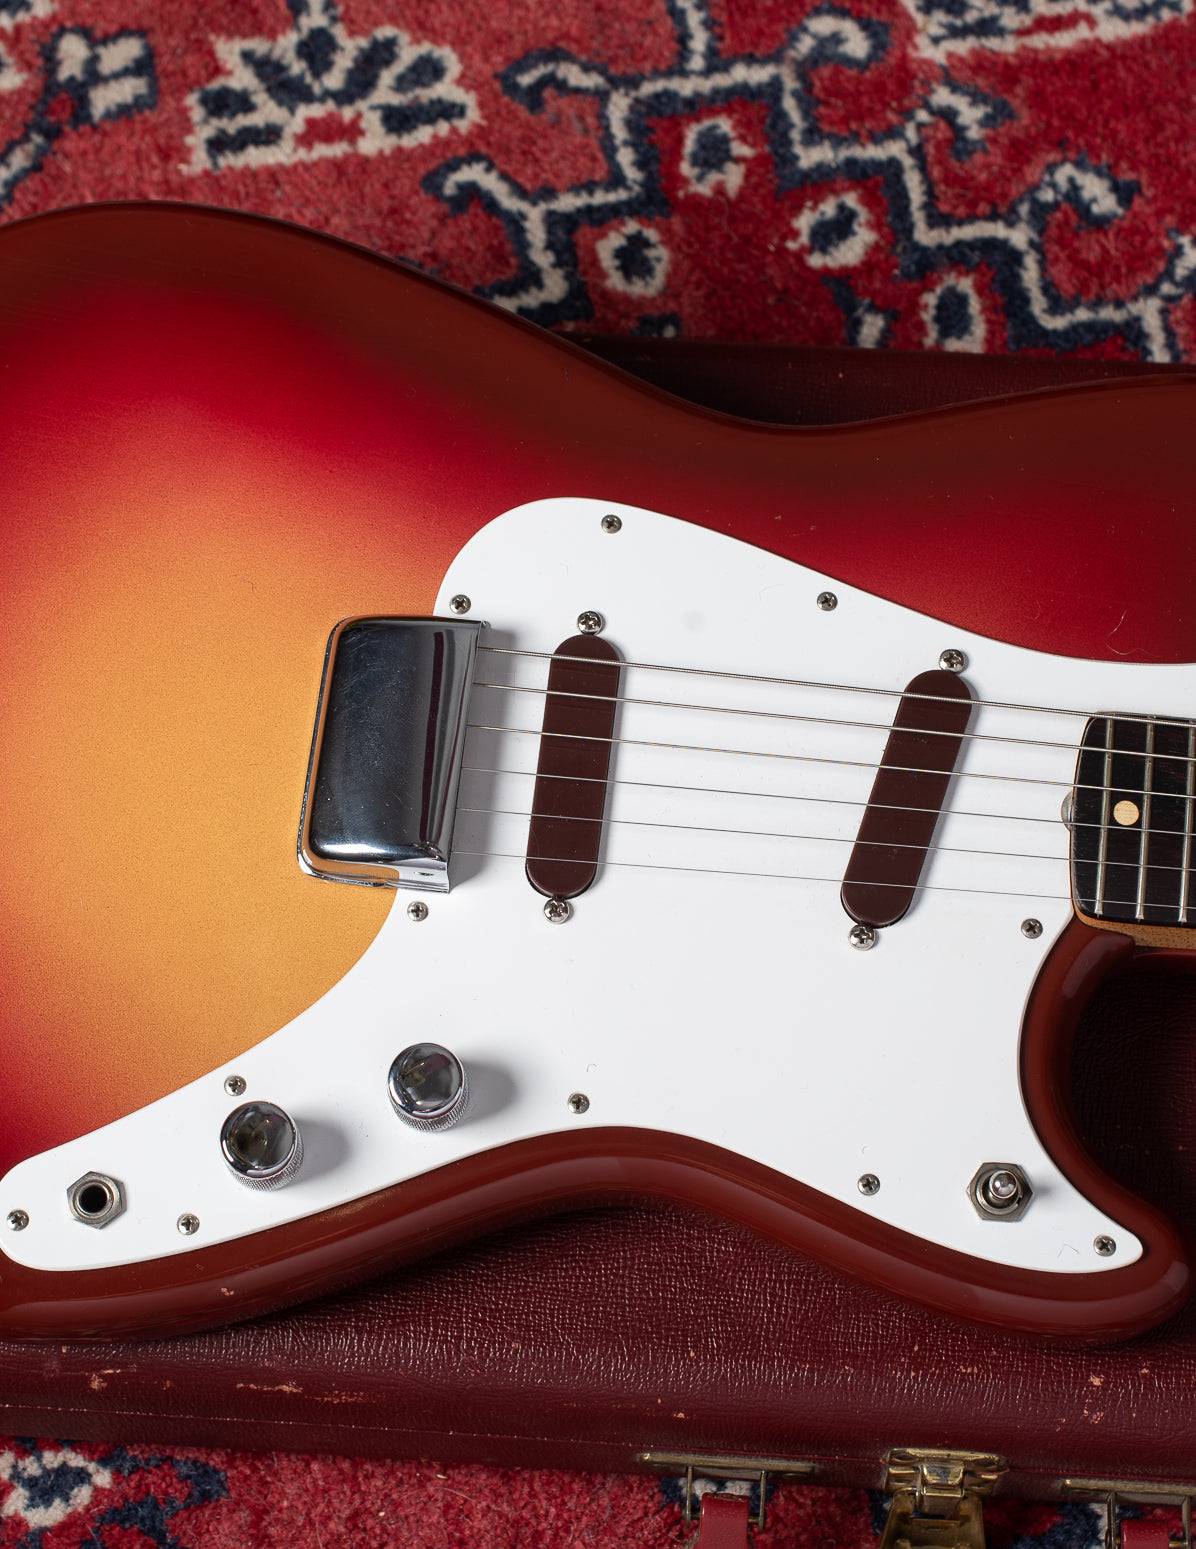 1962 Fender Duo Sonic guitar with white pickguard and two pickup